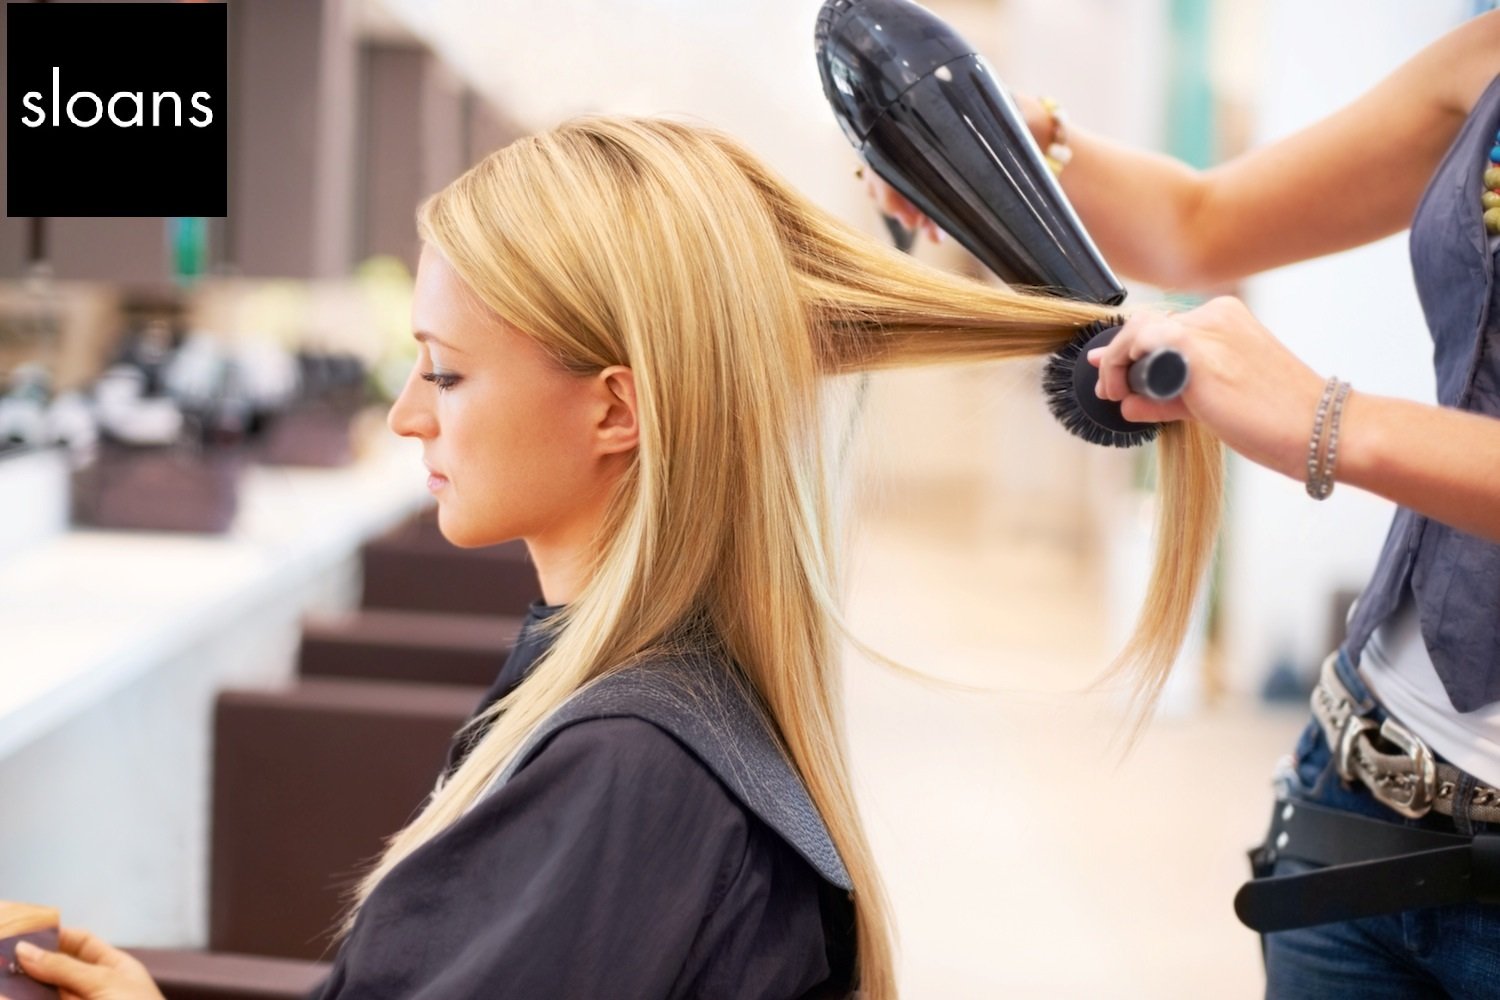 4 Qualities to Look for When Picking a Hair Salon